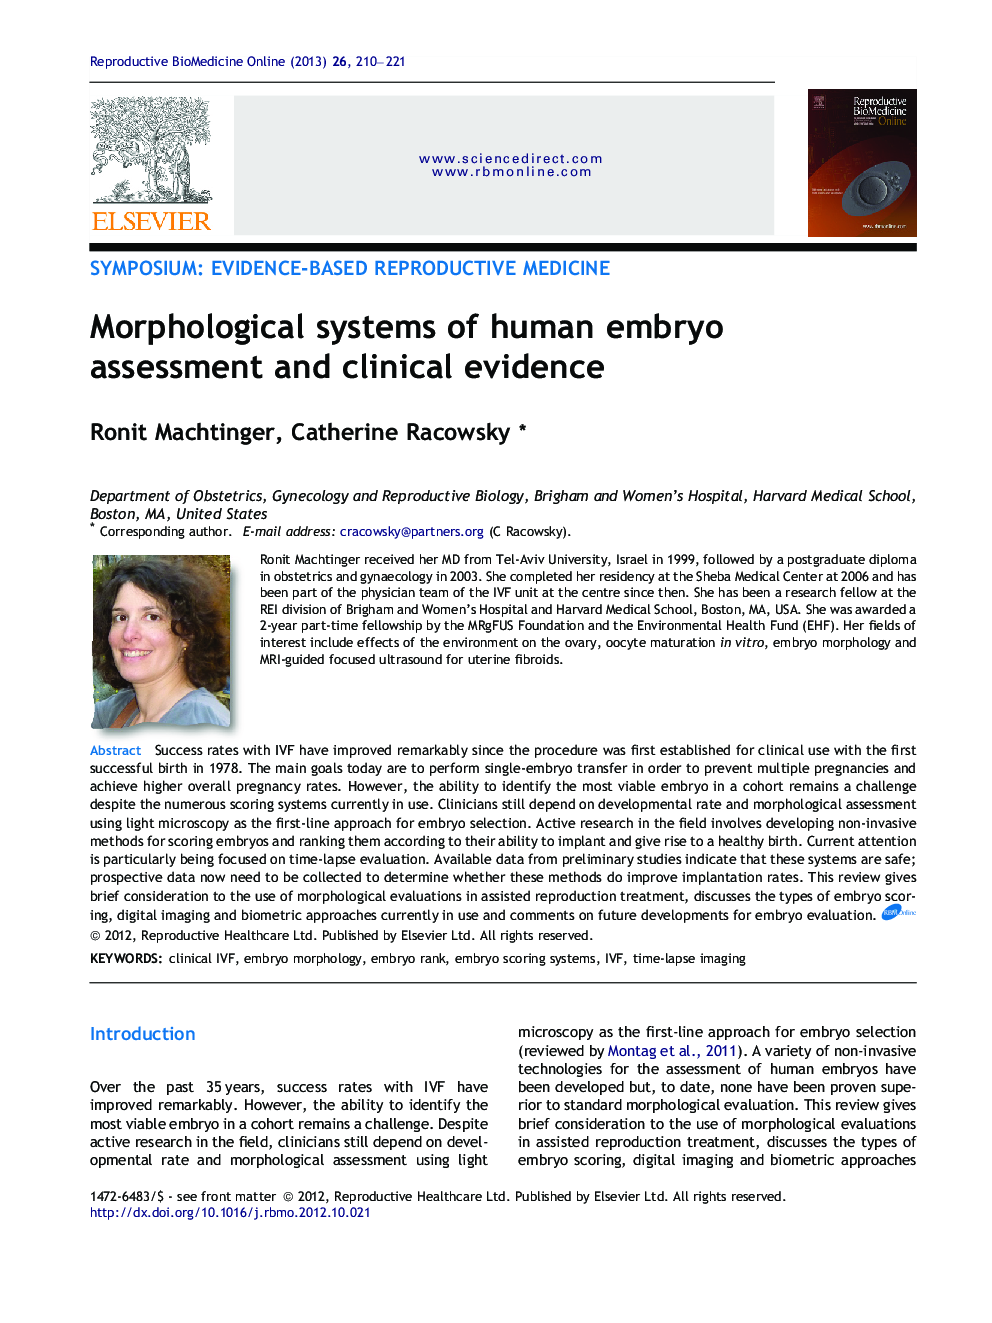 Morphological systems of human embryo assessment and clinical evidence 